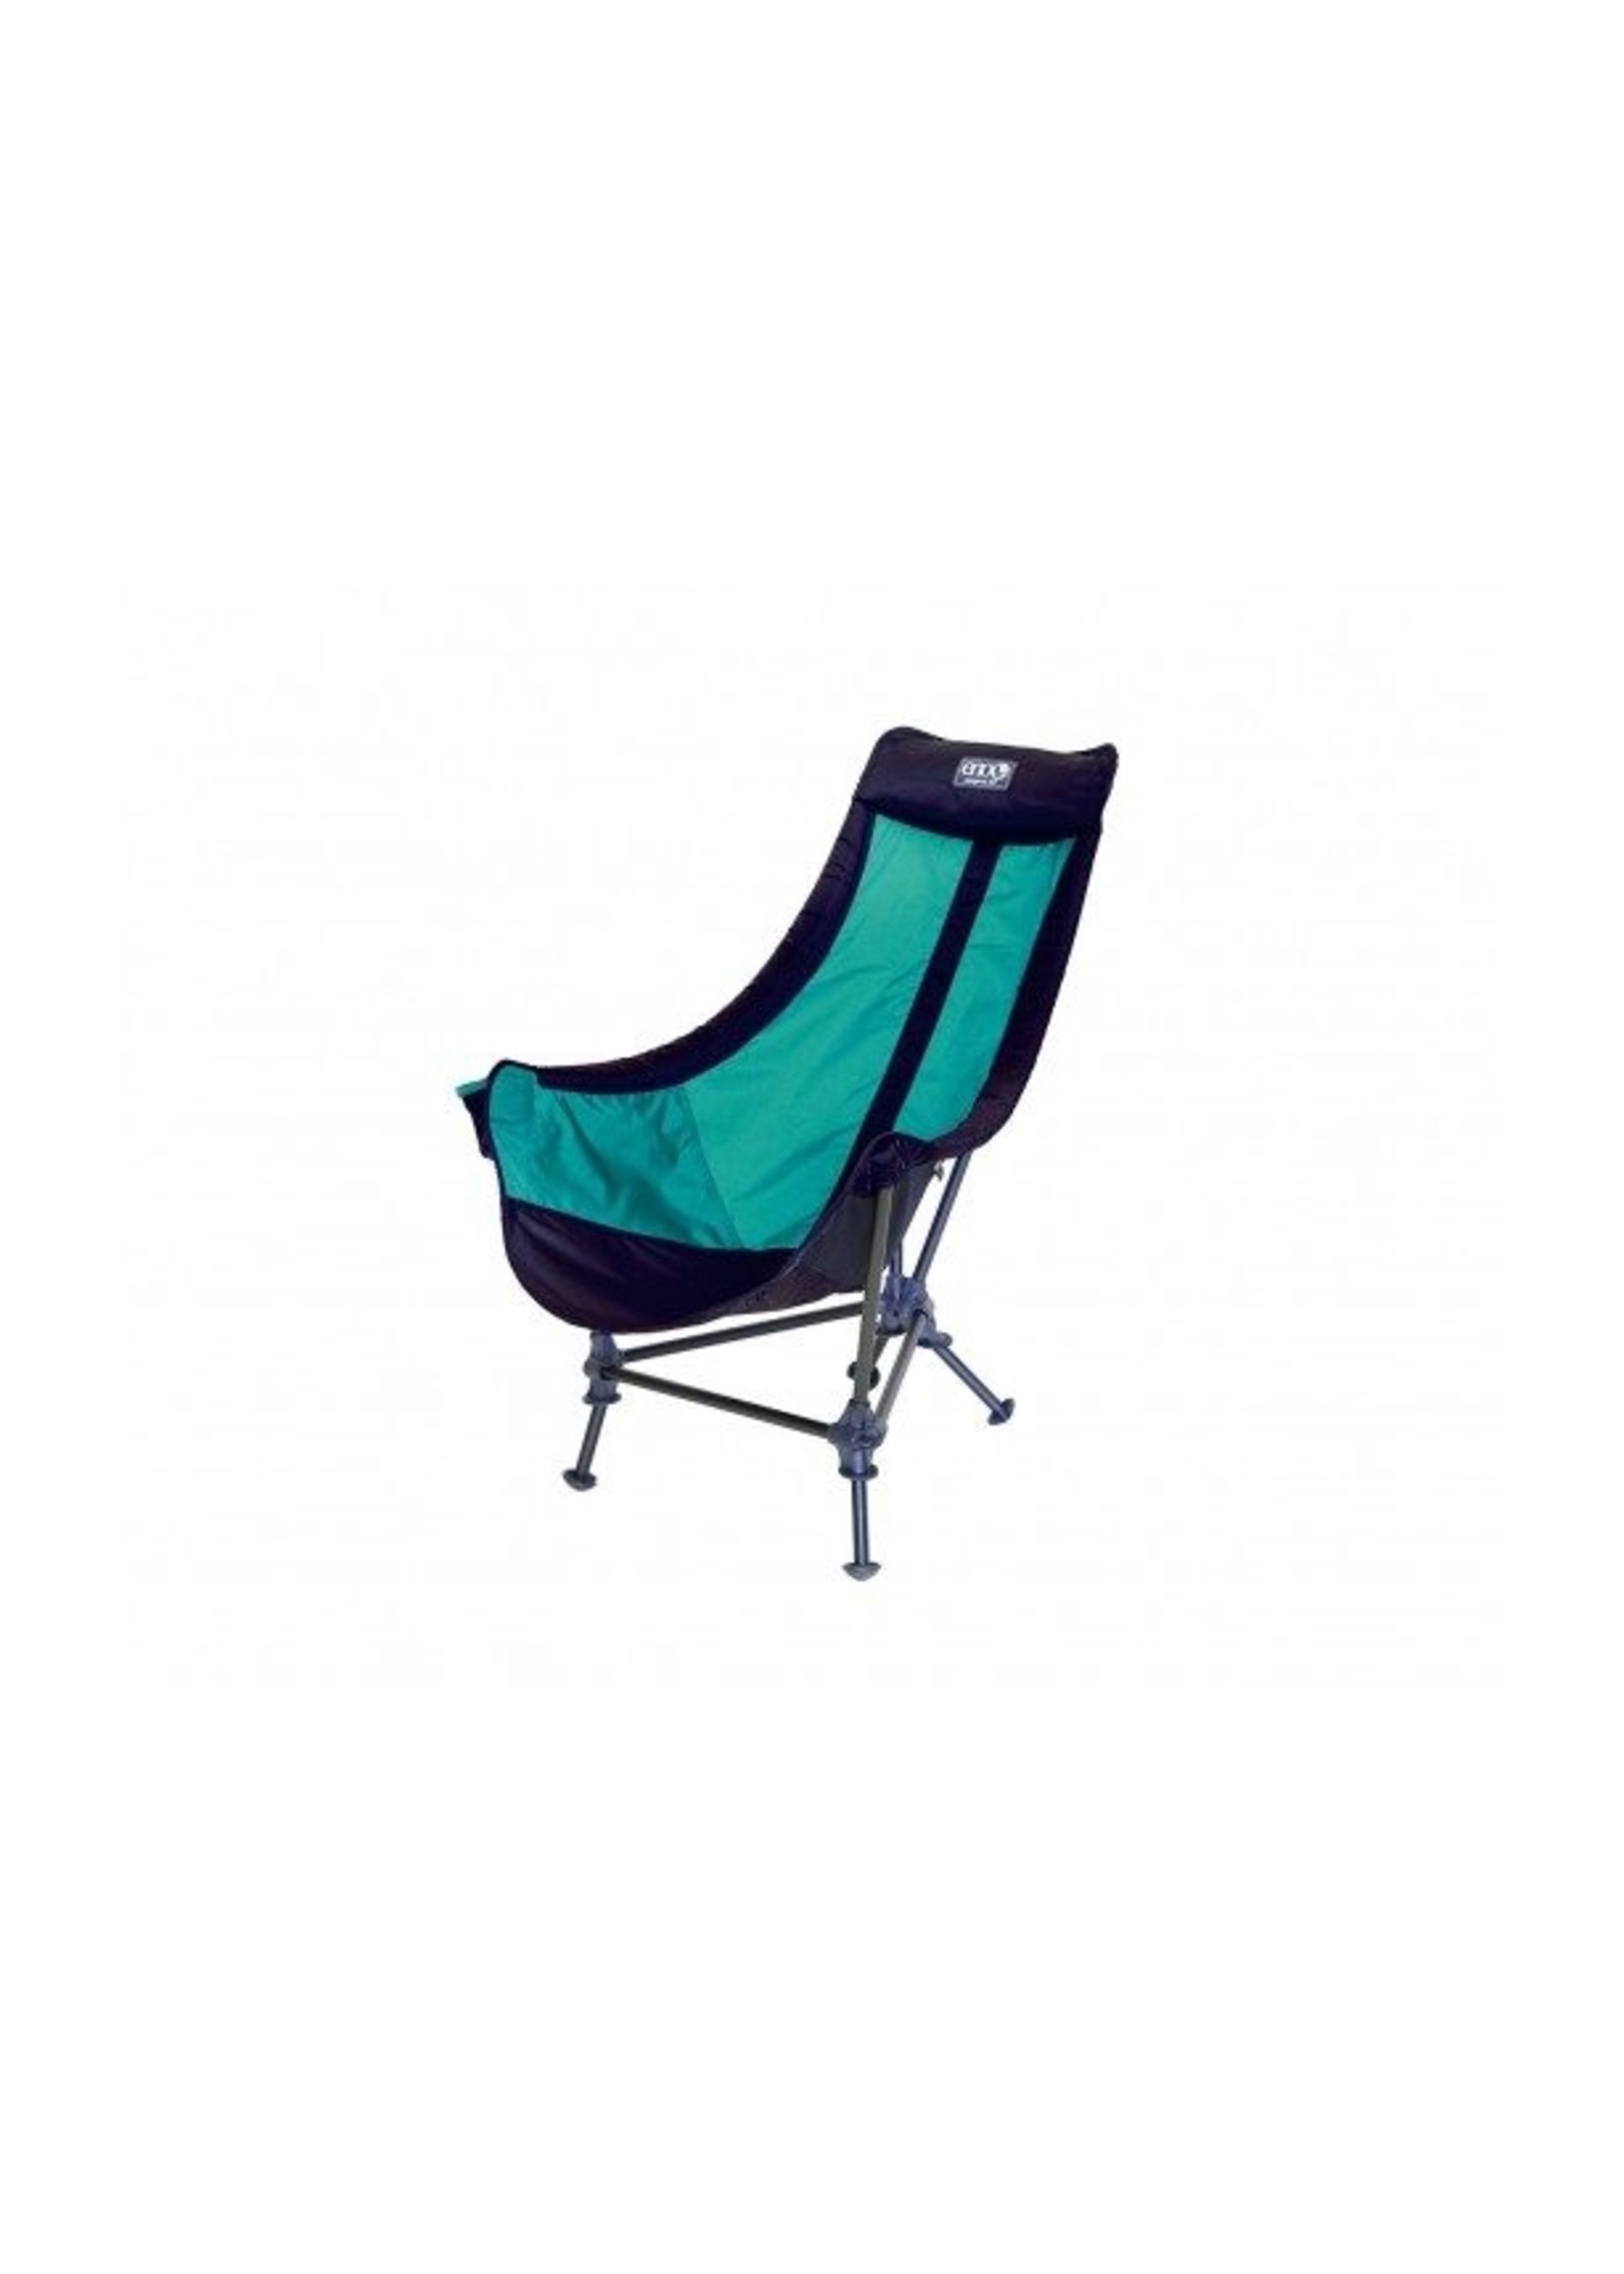 Eno Eagles's Nest Lounger DL Chair 